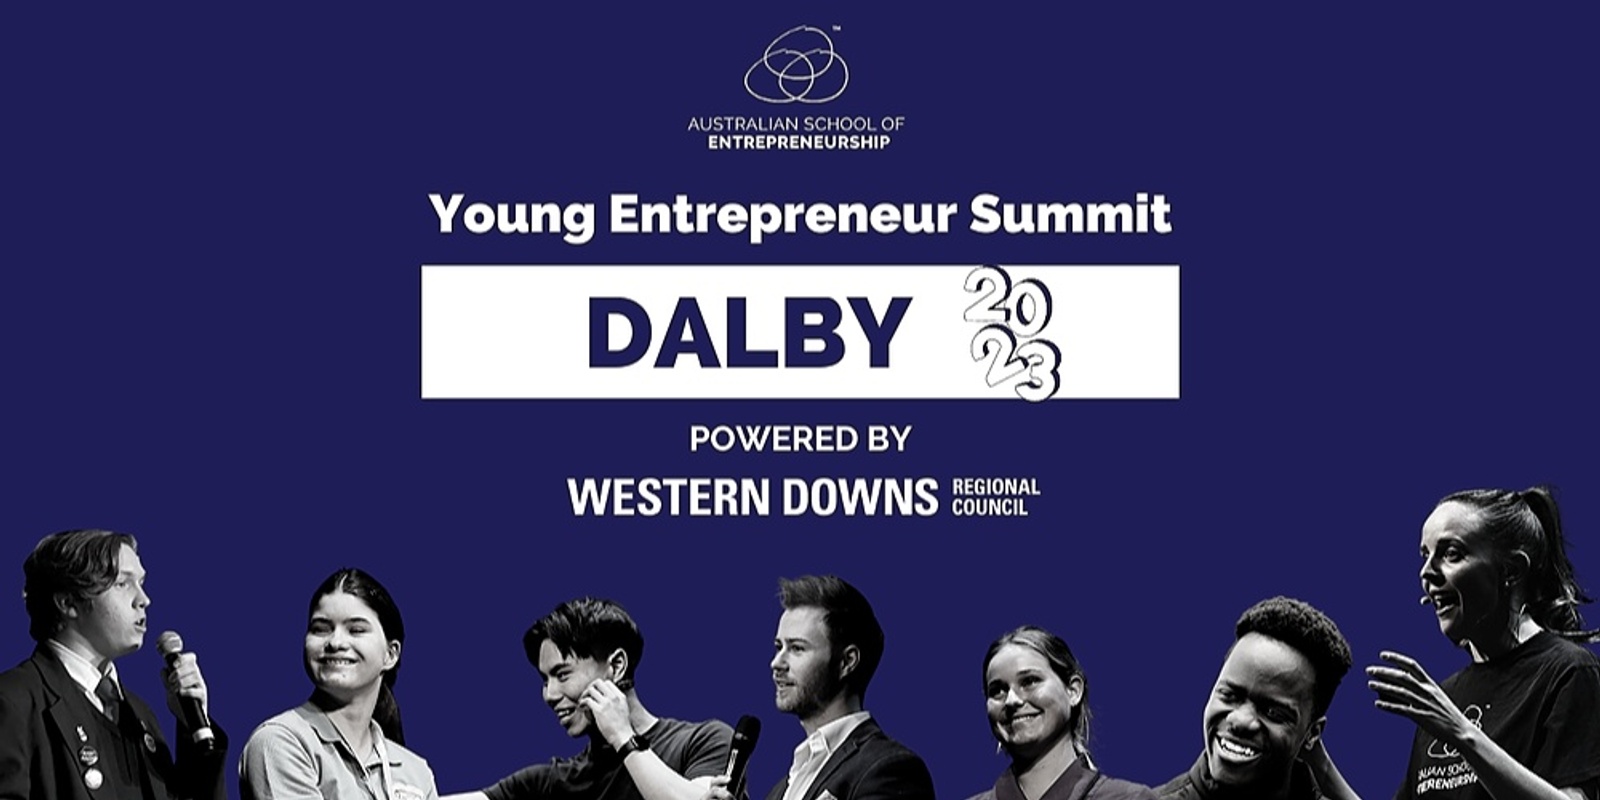 Young Entrepreneur Summit Dalby Powered by Western Downs Regional Council